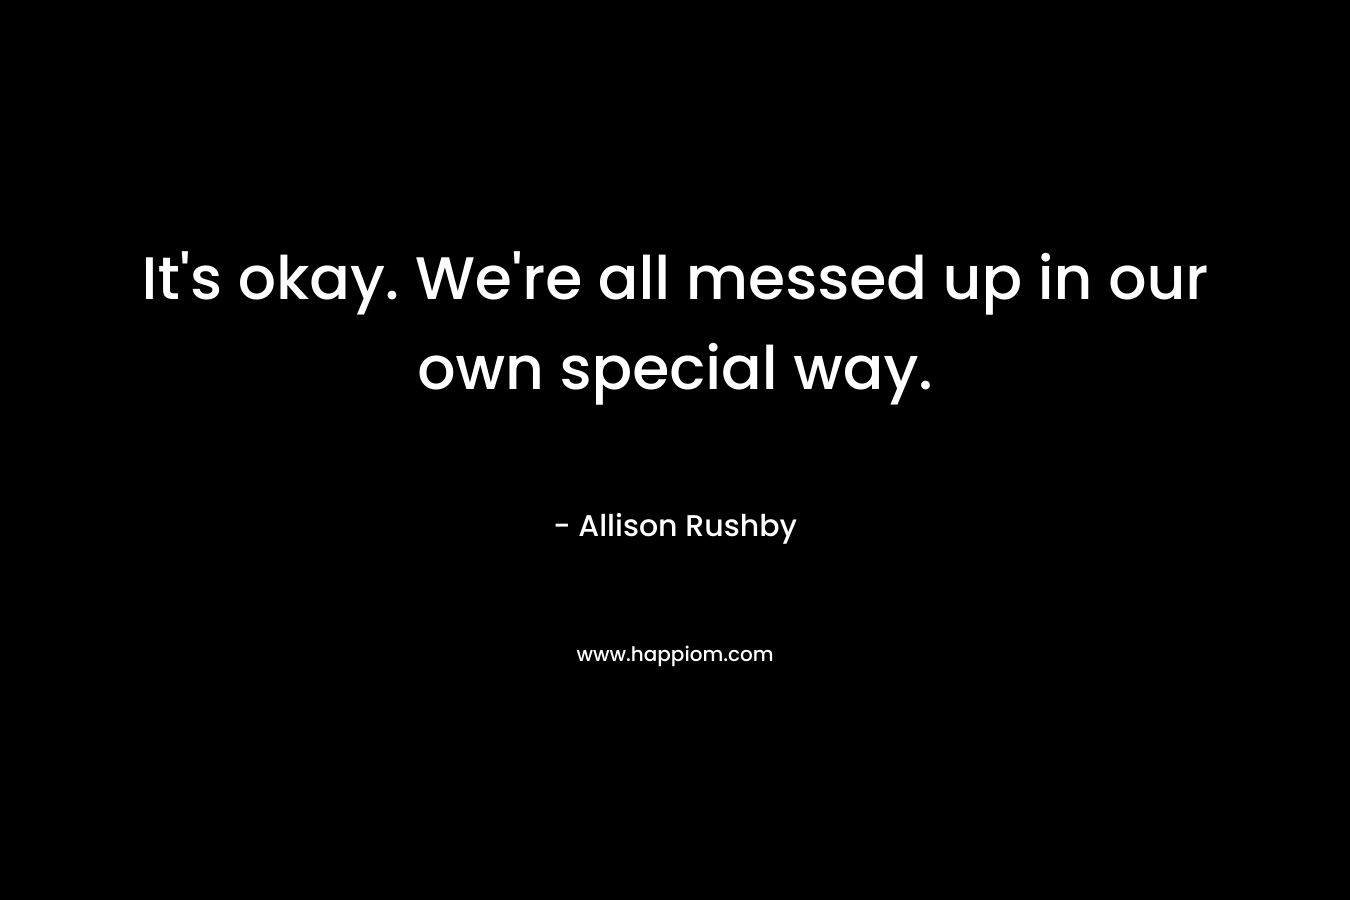 It's okay. We're all messed up in our own special way.